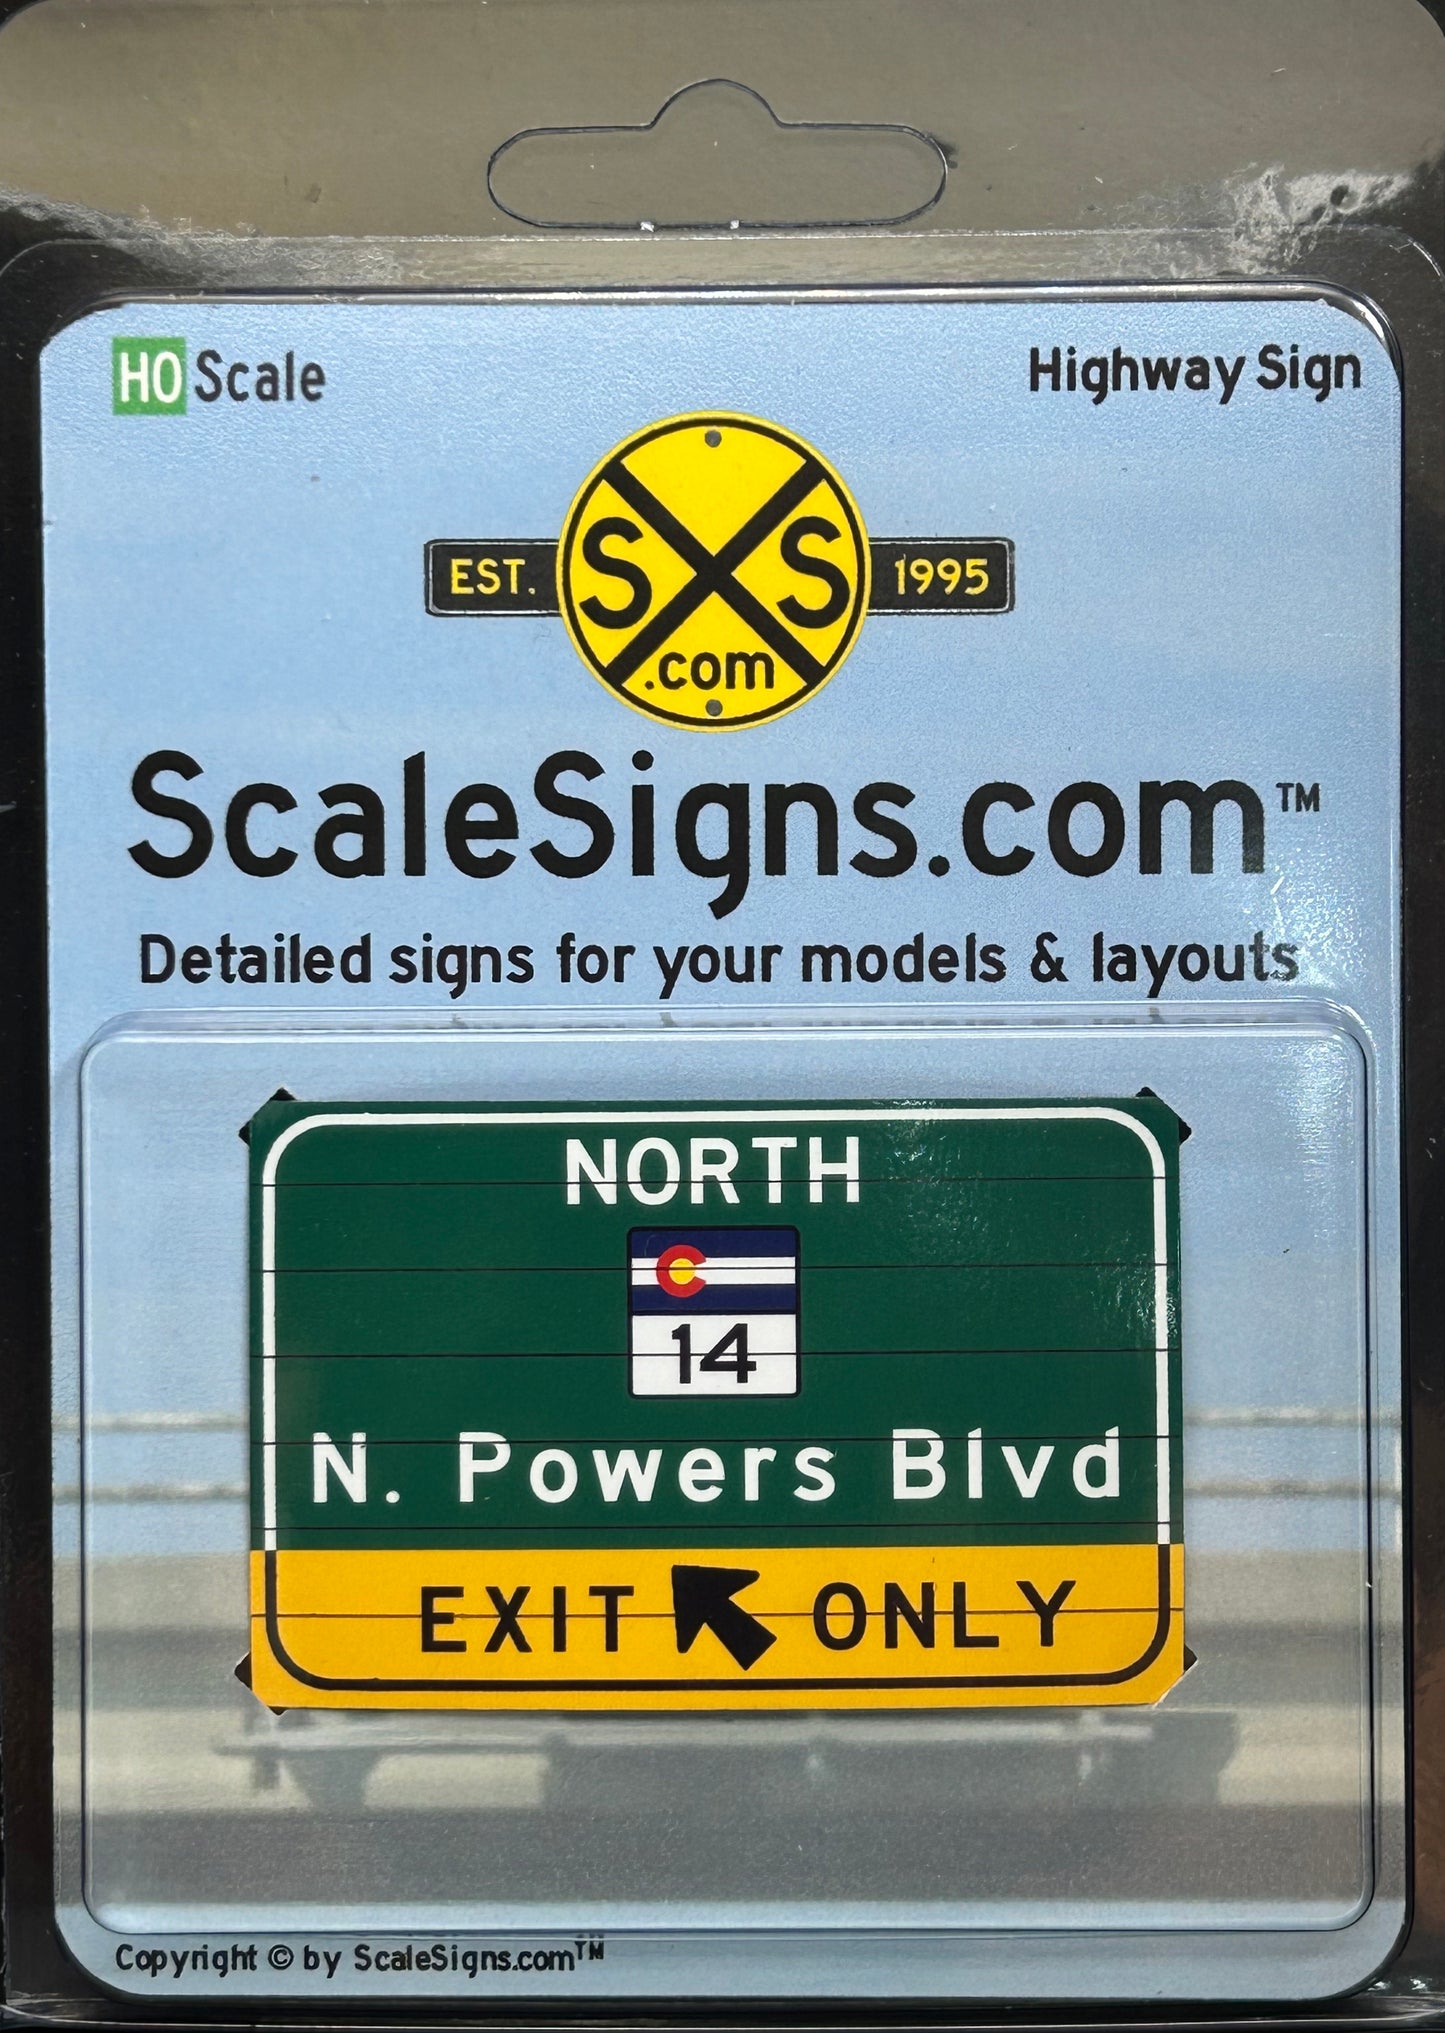 HO - Highway Guide Signs